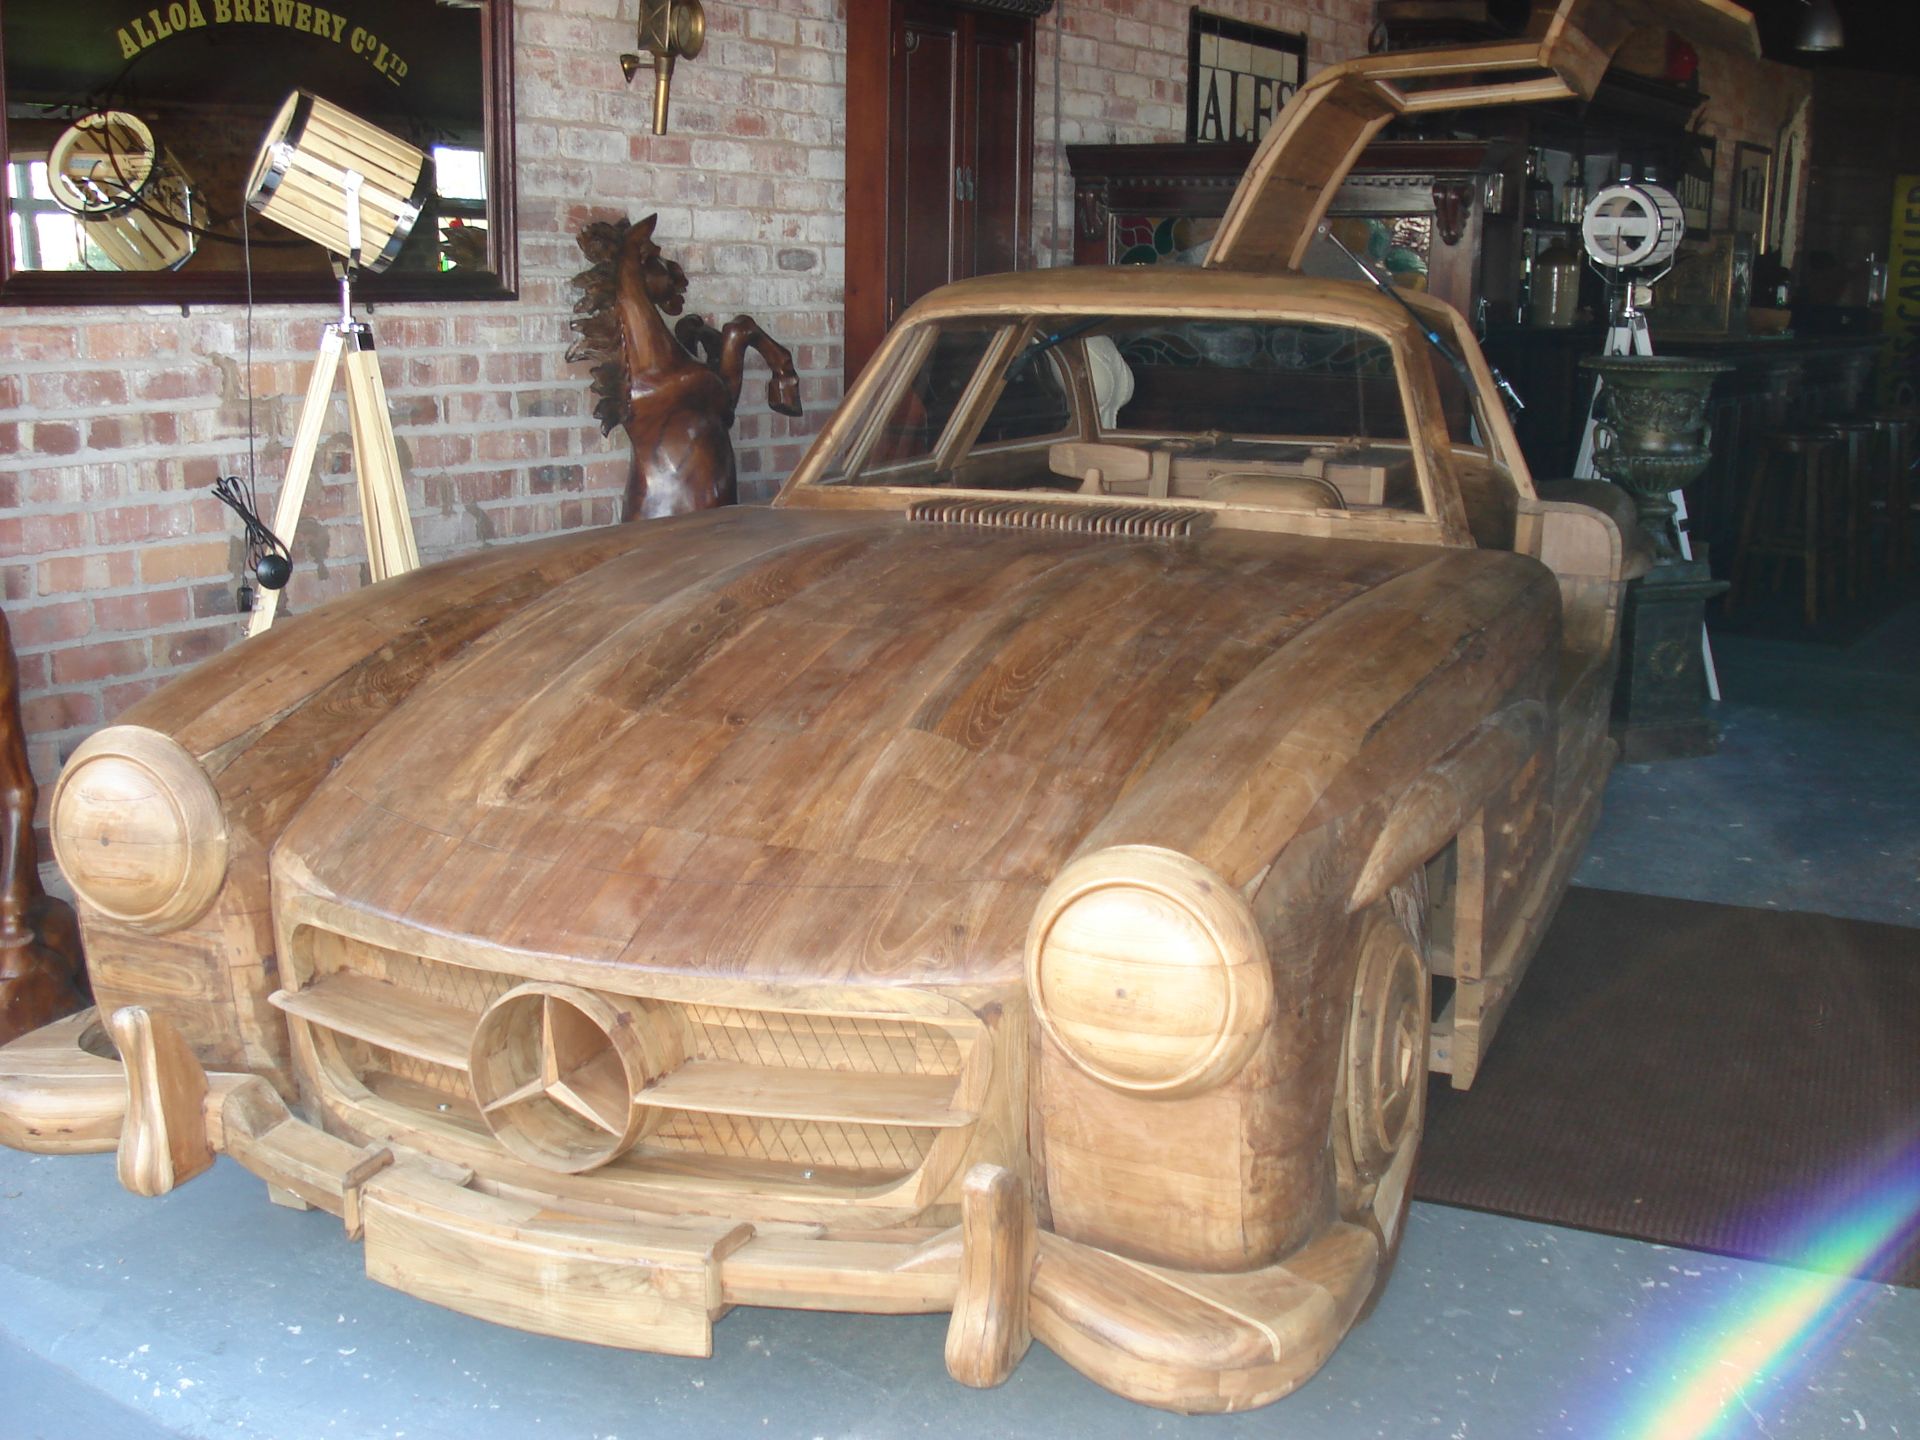 LIFESIZE HANDMADE EXCEPTIONAL SOLID TEAK UNIQUE MERCEDES BENZ GULLWING  Appraisal:  Serial No: